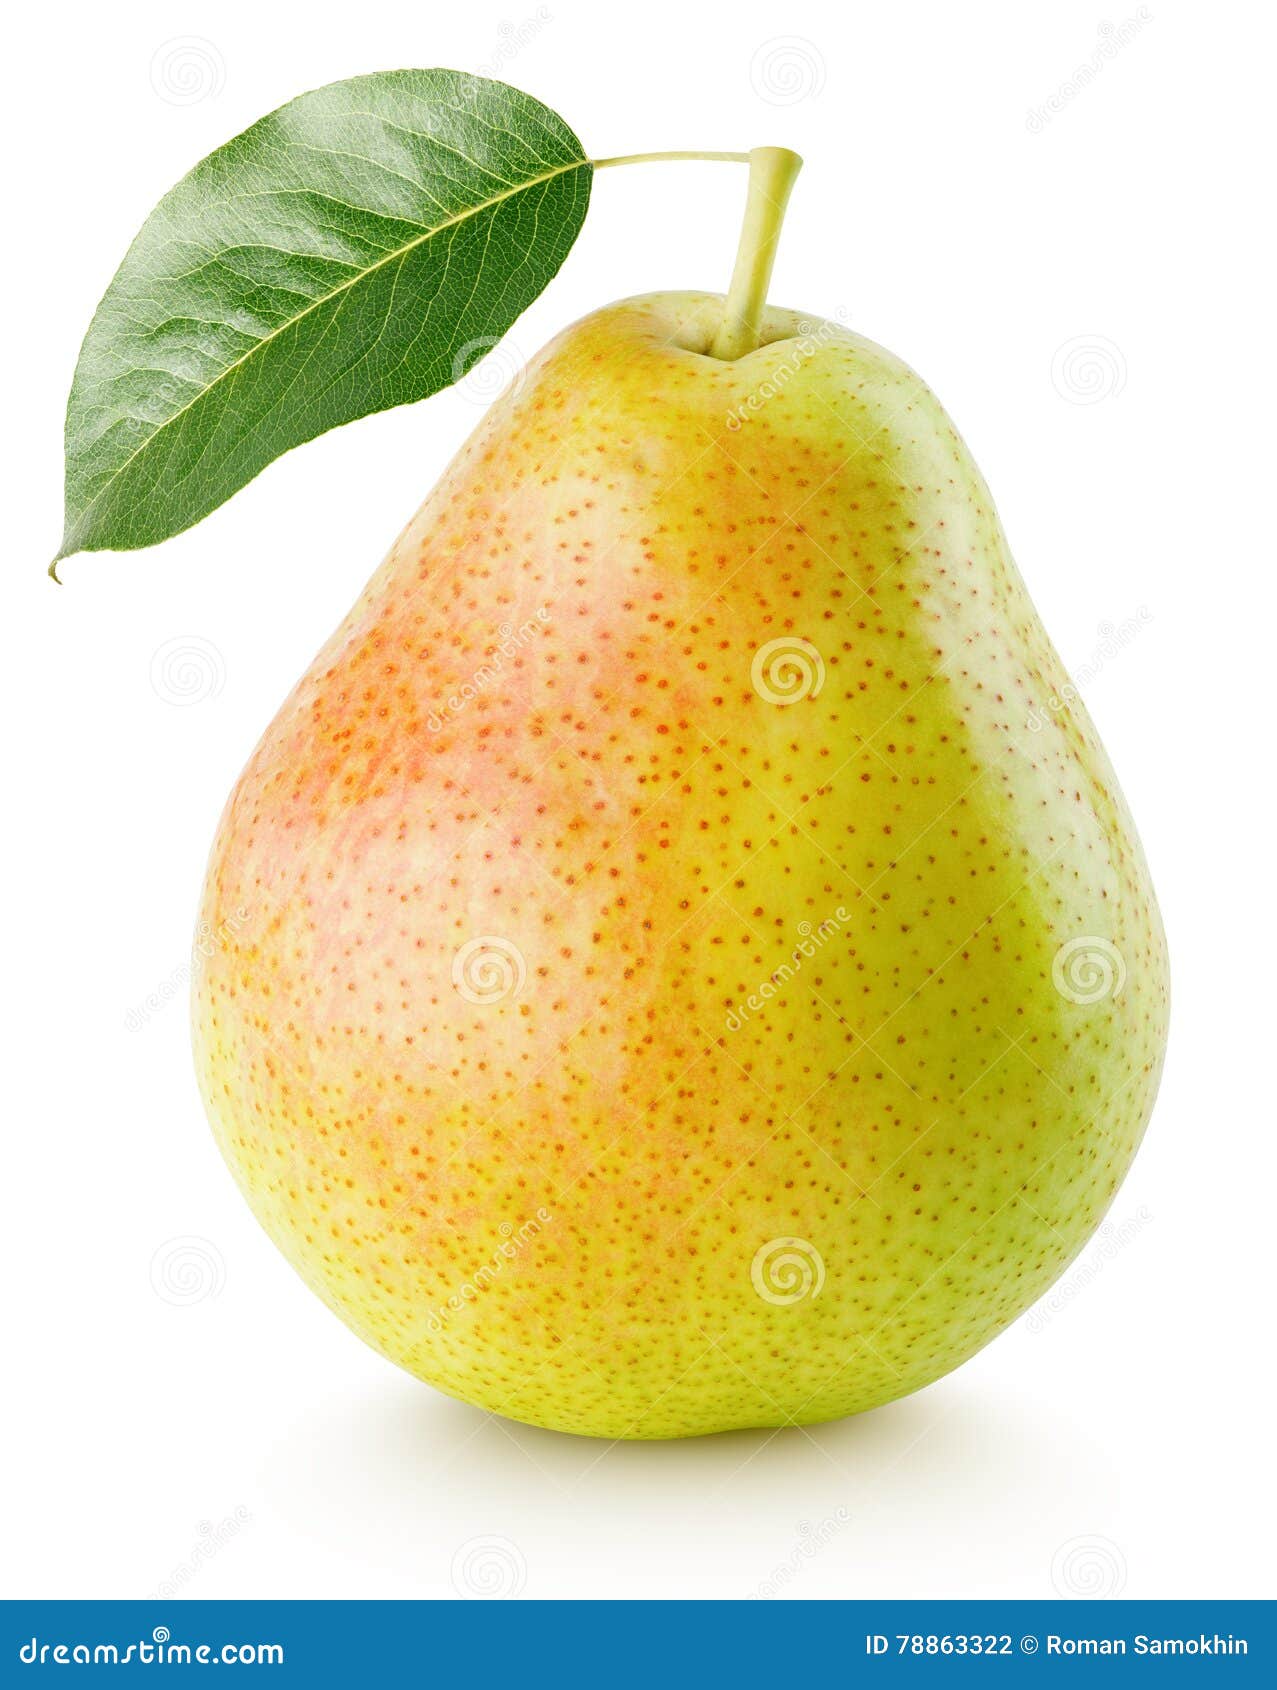 red yellow pear fruit with leaf  on white